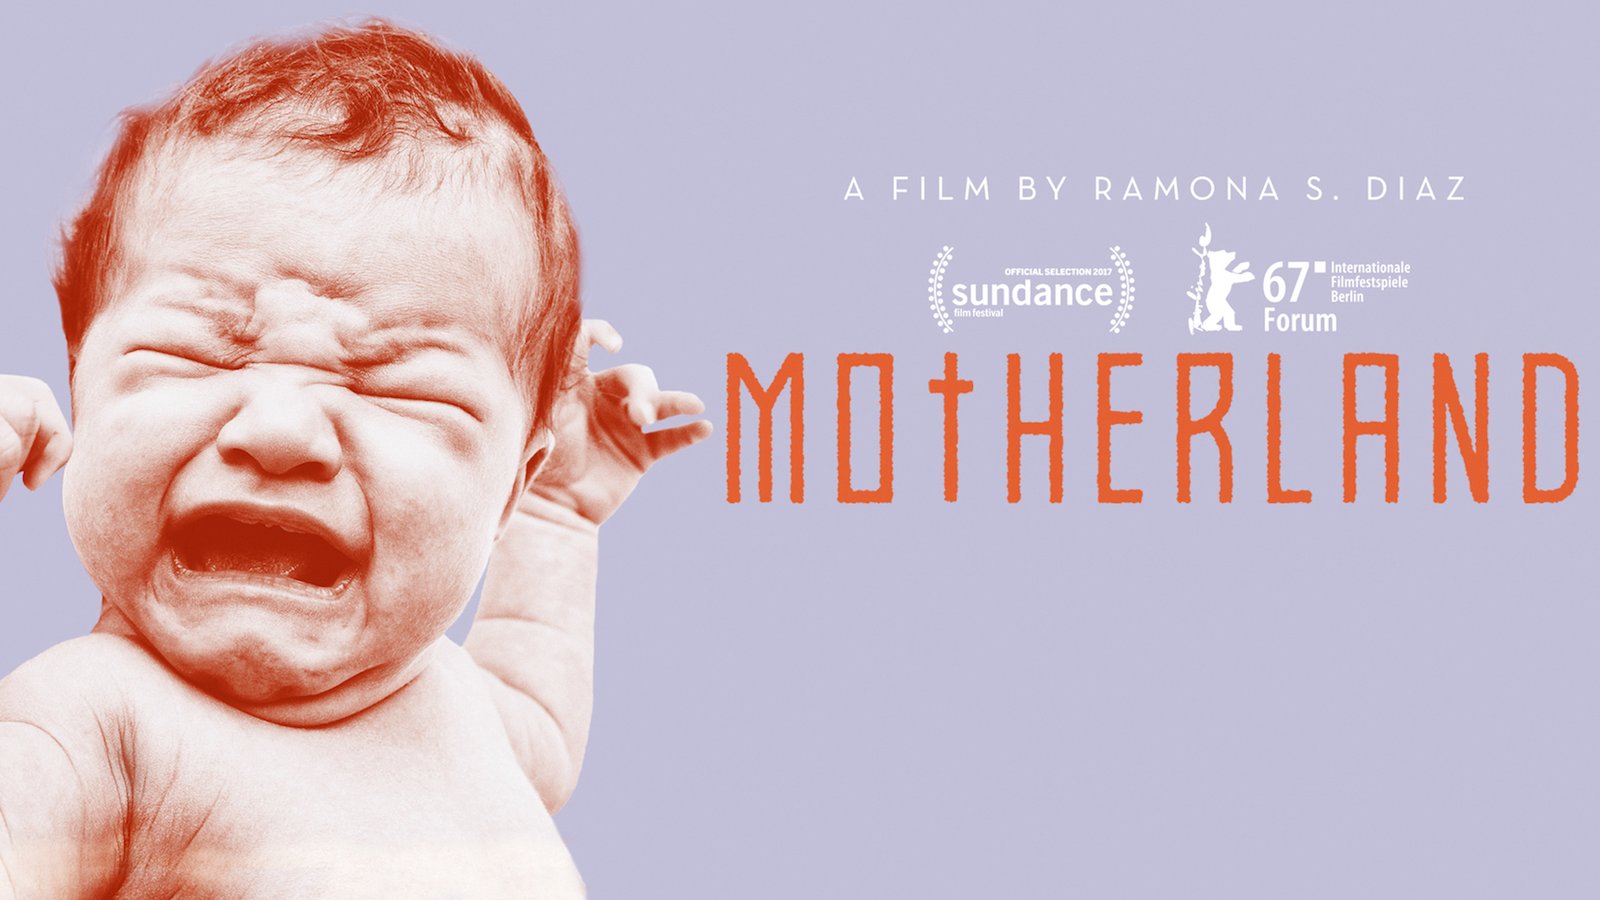 Motherland - An Intimate Look at the World's Busiest Maternity Hospital